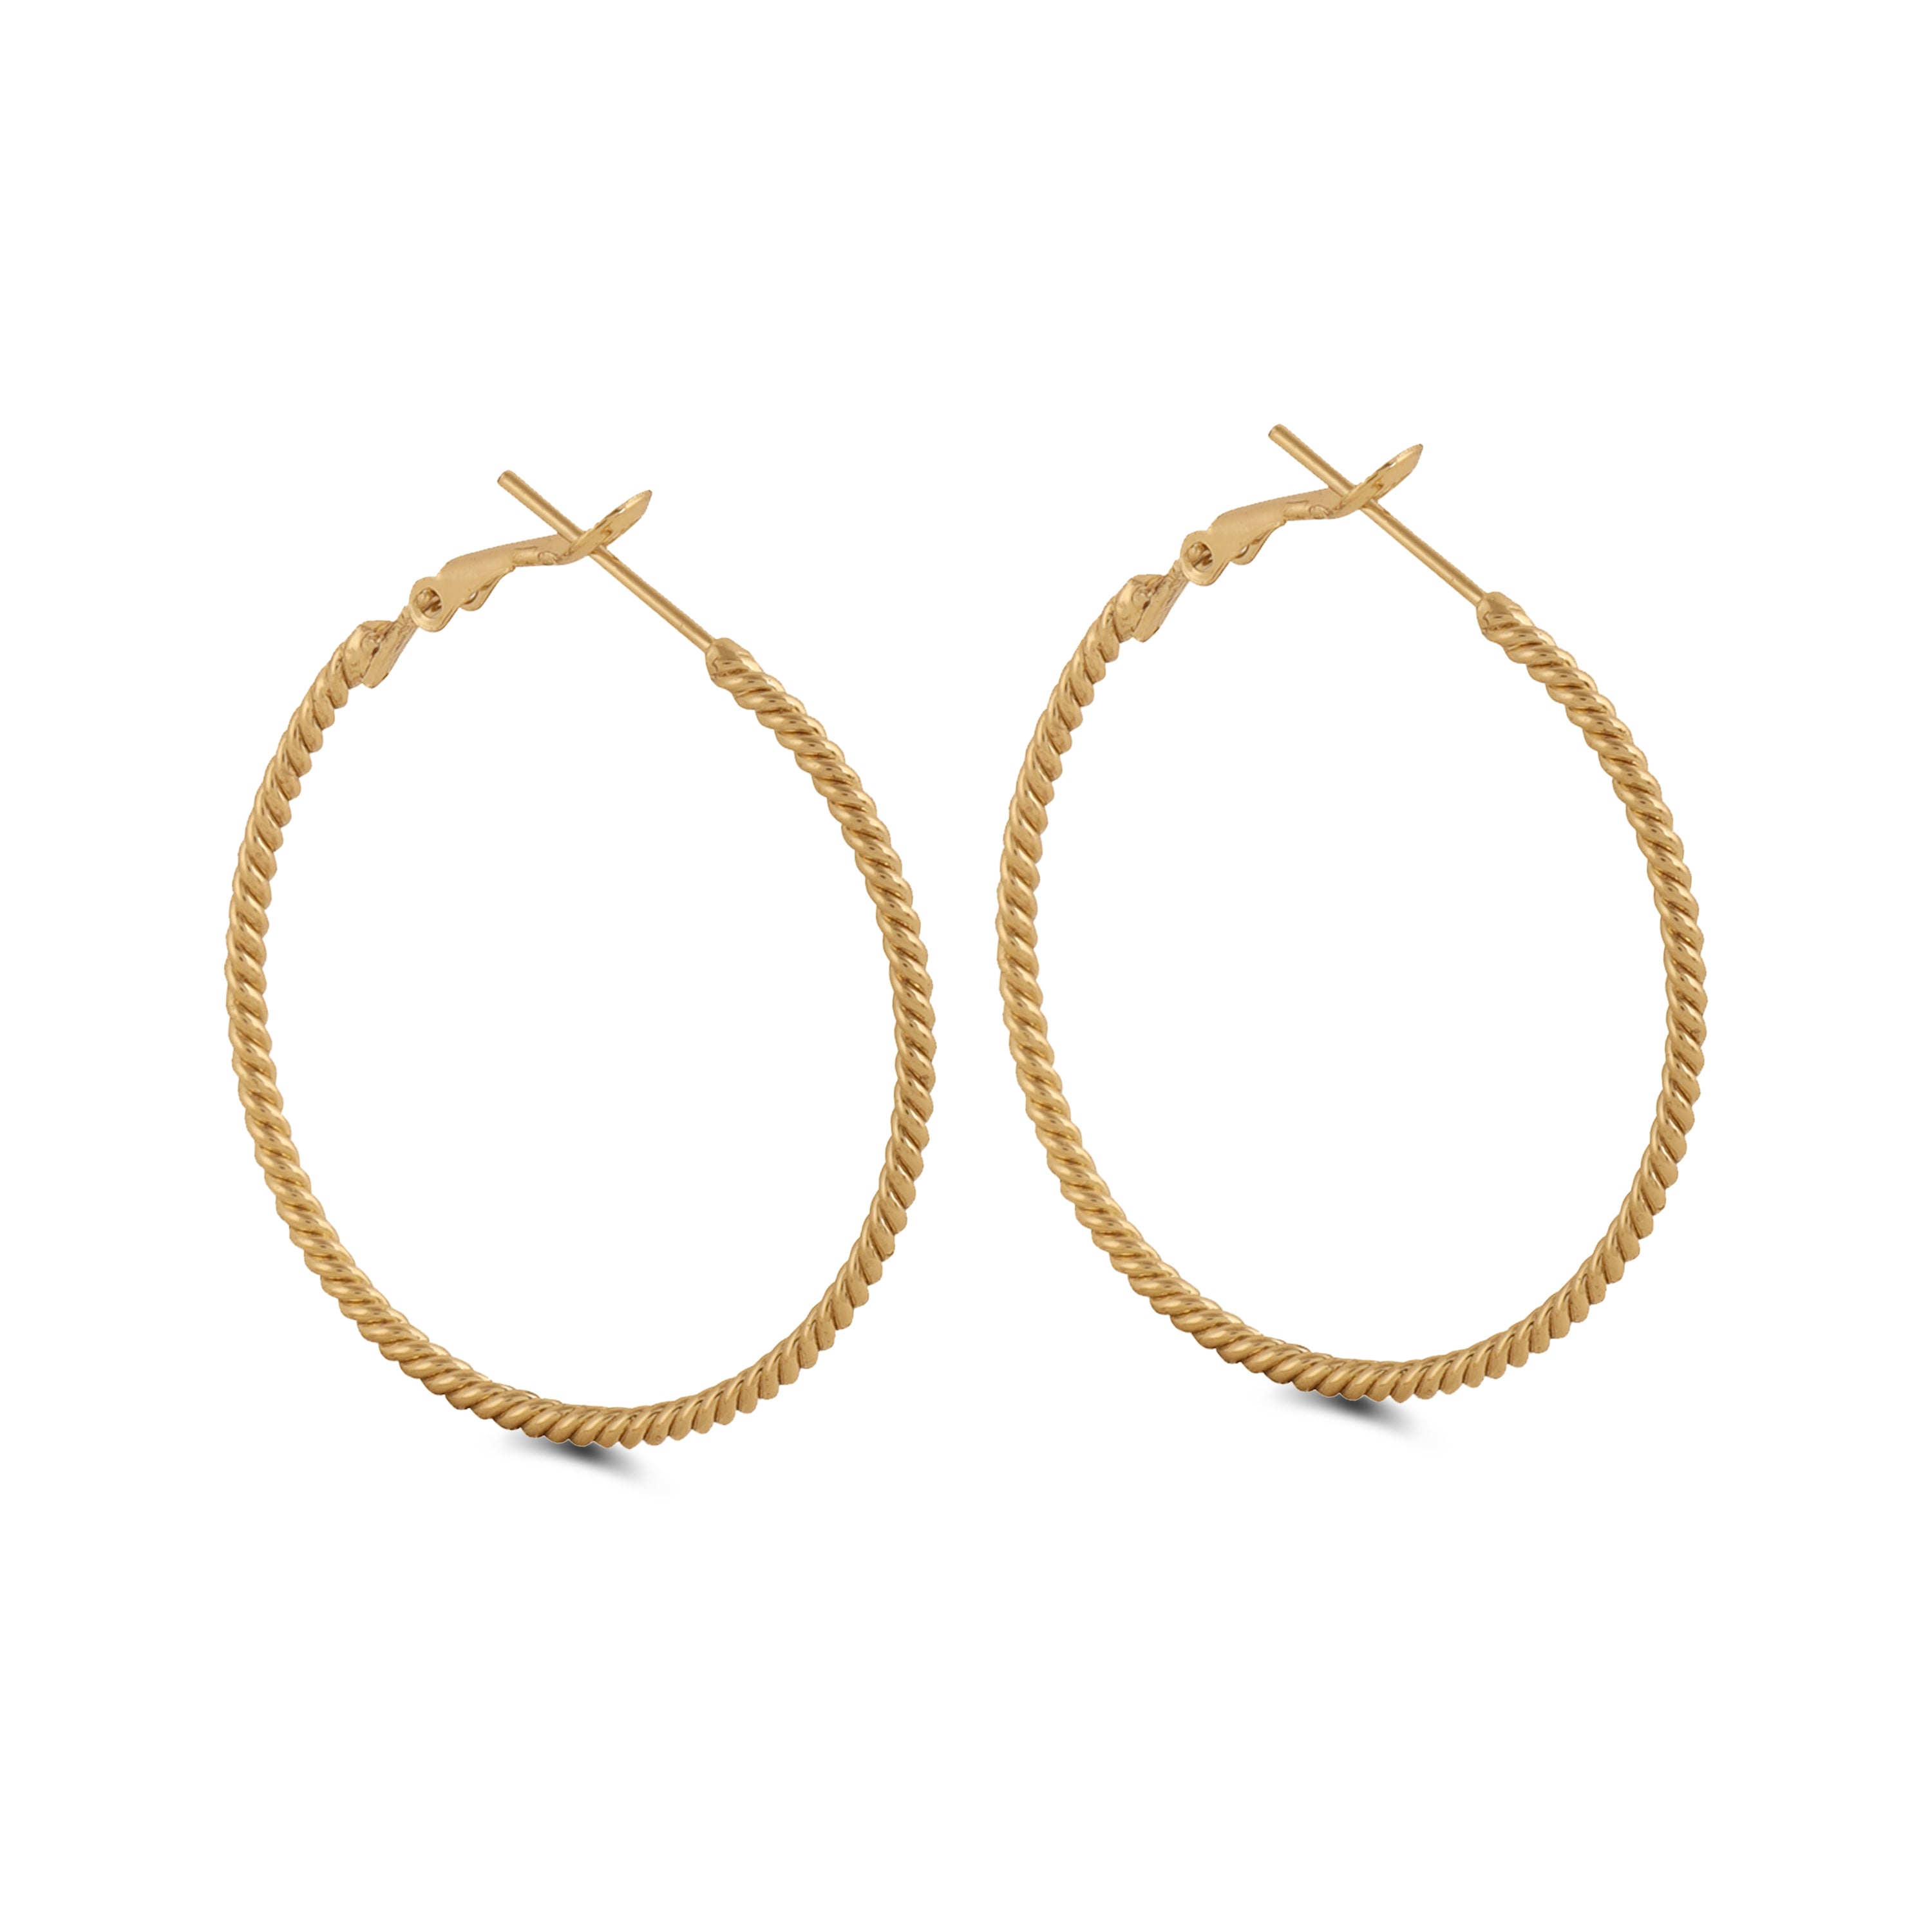 TFC Classic Gold Plated Hoop Earrings- Discover daily wear gold earrings including stud earrings, hoop earrings, and pearl earrings, perfect as earrings for women and earrings for girls.Find the cheapest fashion jewellery which is anti-tarnis​h only at The Fun company.